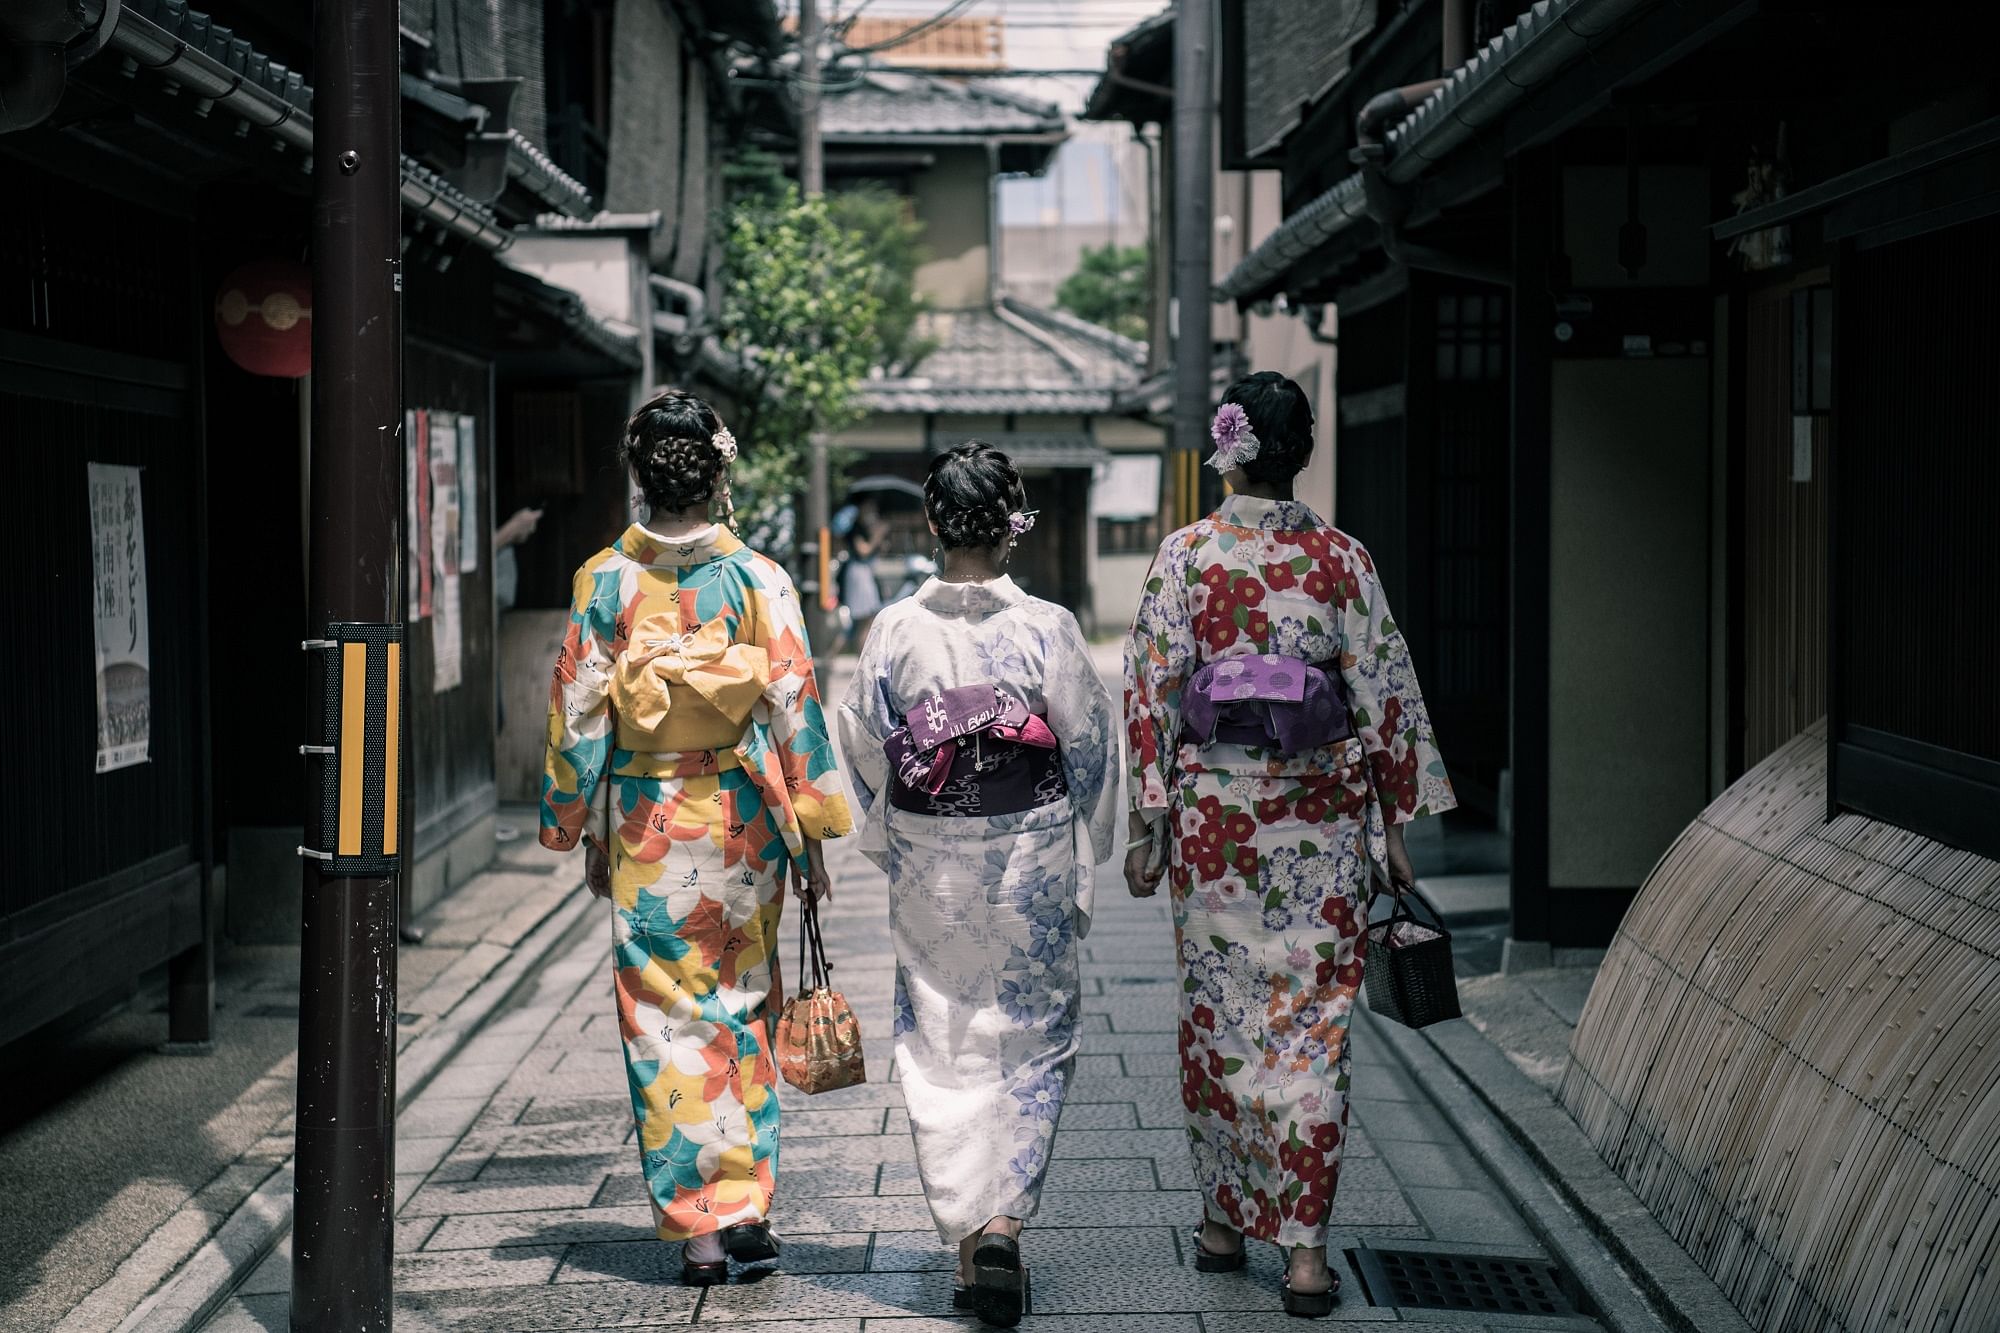 Gion has been the home of geishas.